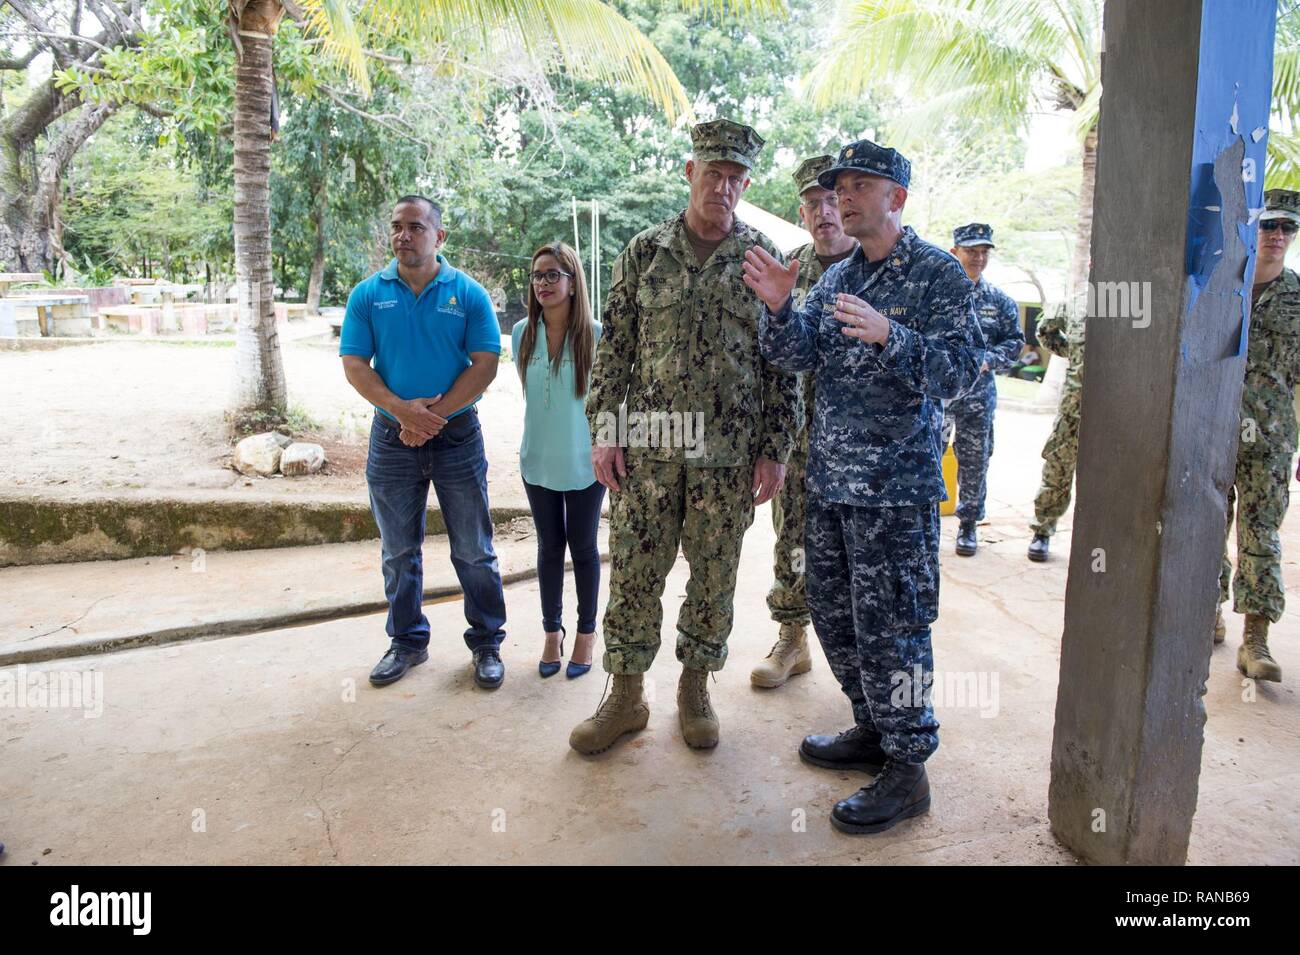 TRUJILLO, Honduras (Feb. 23, 2017) – Rear Adm. Sean S. Buck (middle), Commander U.S. Naval Forces Southern Command/U.S. 4th Fleet NAVSO/FOURTHFLT), receives a tour of the Continuing Promise 2017 (CP-17) medical site from Lt. Cmdr. Robert Lennon, CP-17's Medical Officer in Charge, in support of the mission's visit to Trujillo, Honduras. CP-17 is a U.S. Southern Command-sponsored and U.S. Naval Forces Southern Command/U.S. 4th Fleet-conducted deployment to conduct civil-military operations including humanitarian assistance, training engagements, and medical, dental, and veterinary support in an  Stock Photo